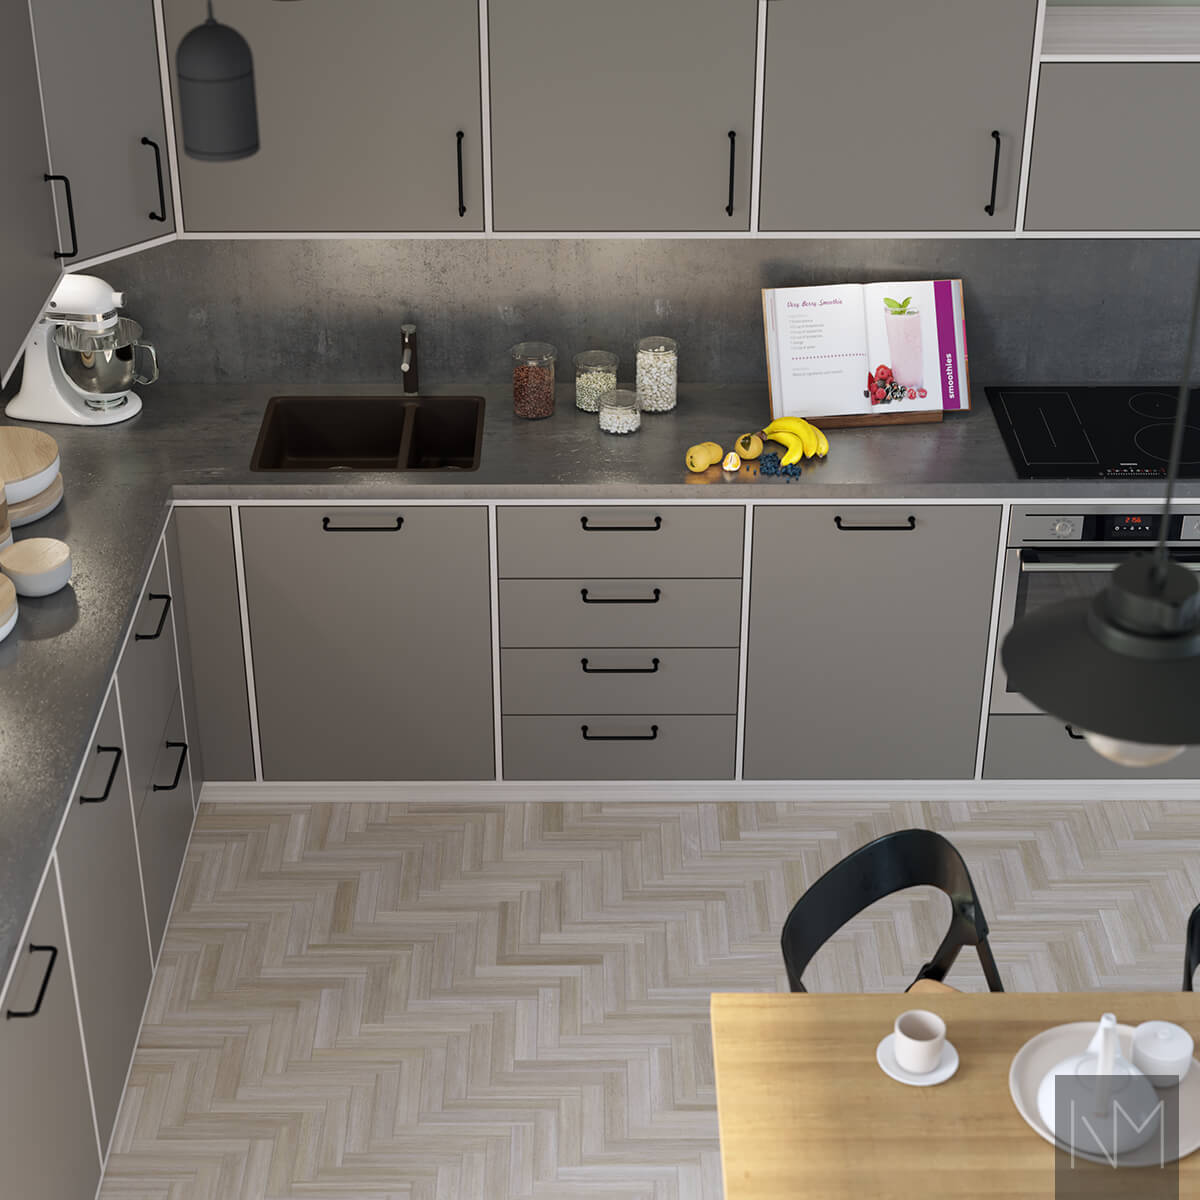 Basic design for kitchen cabinets. Color SOBER 10249. Side panels in Nordic white-stained ash. Castle handles in black.